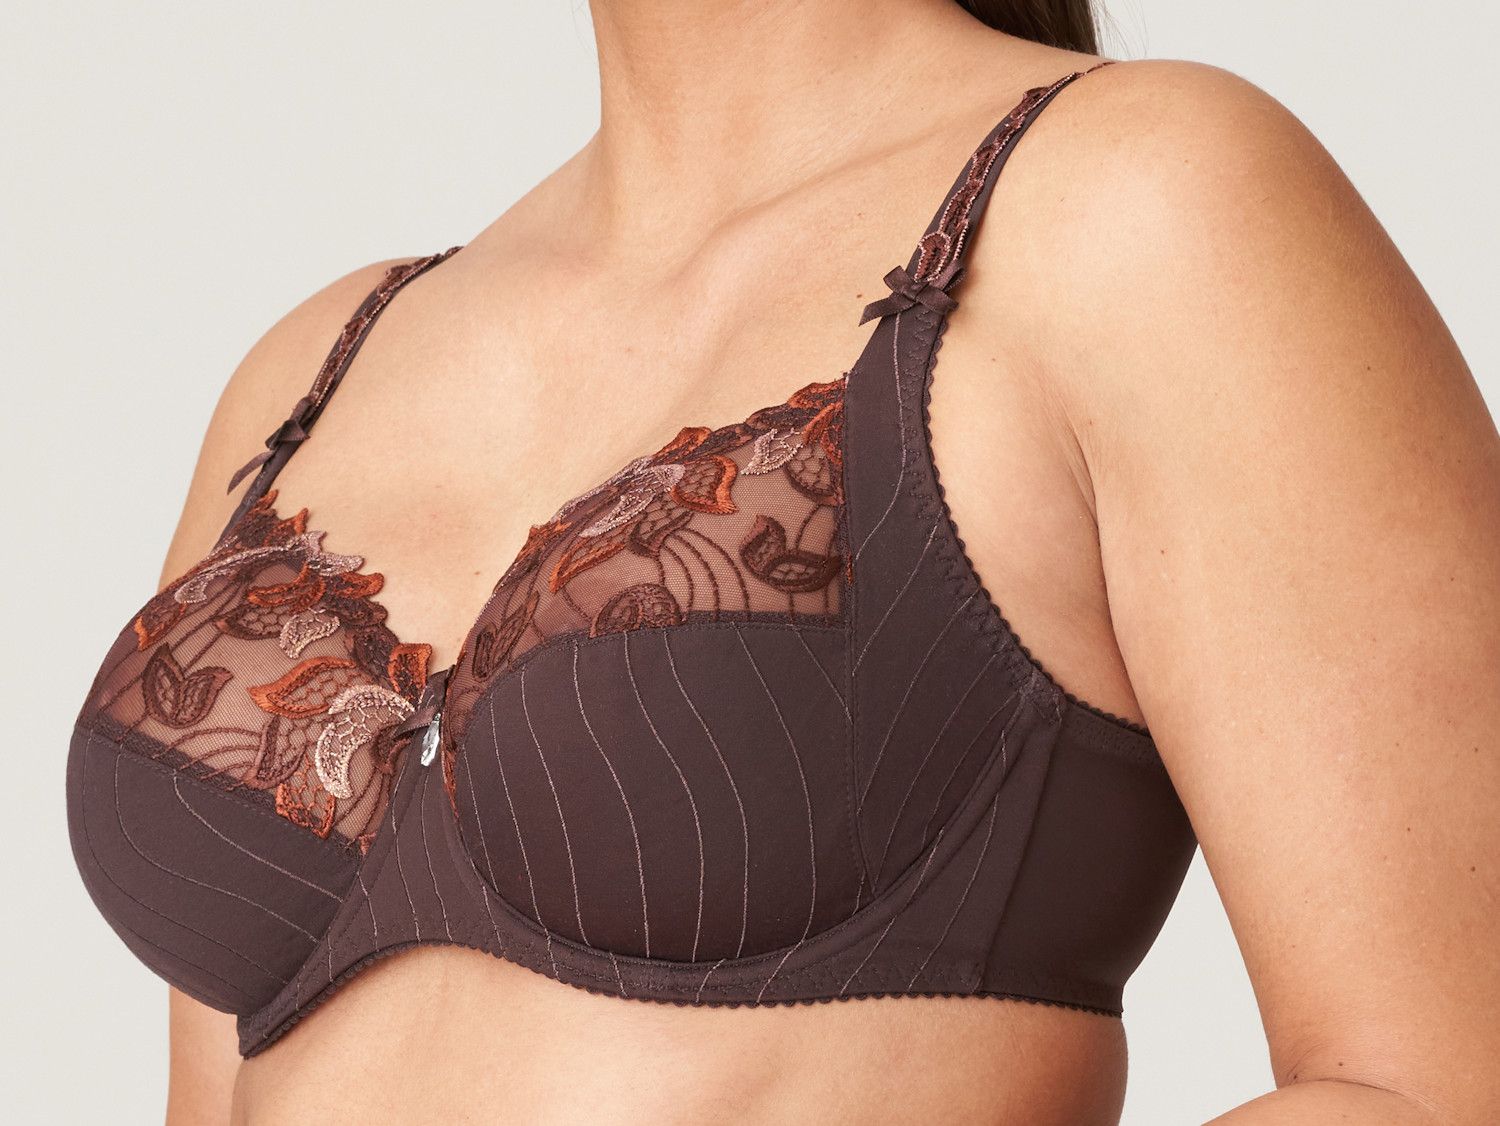 PrimaDonna Deauville Large Cups Full Cup Wire Bra in Caffe Latte